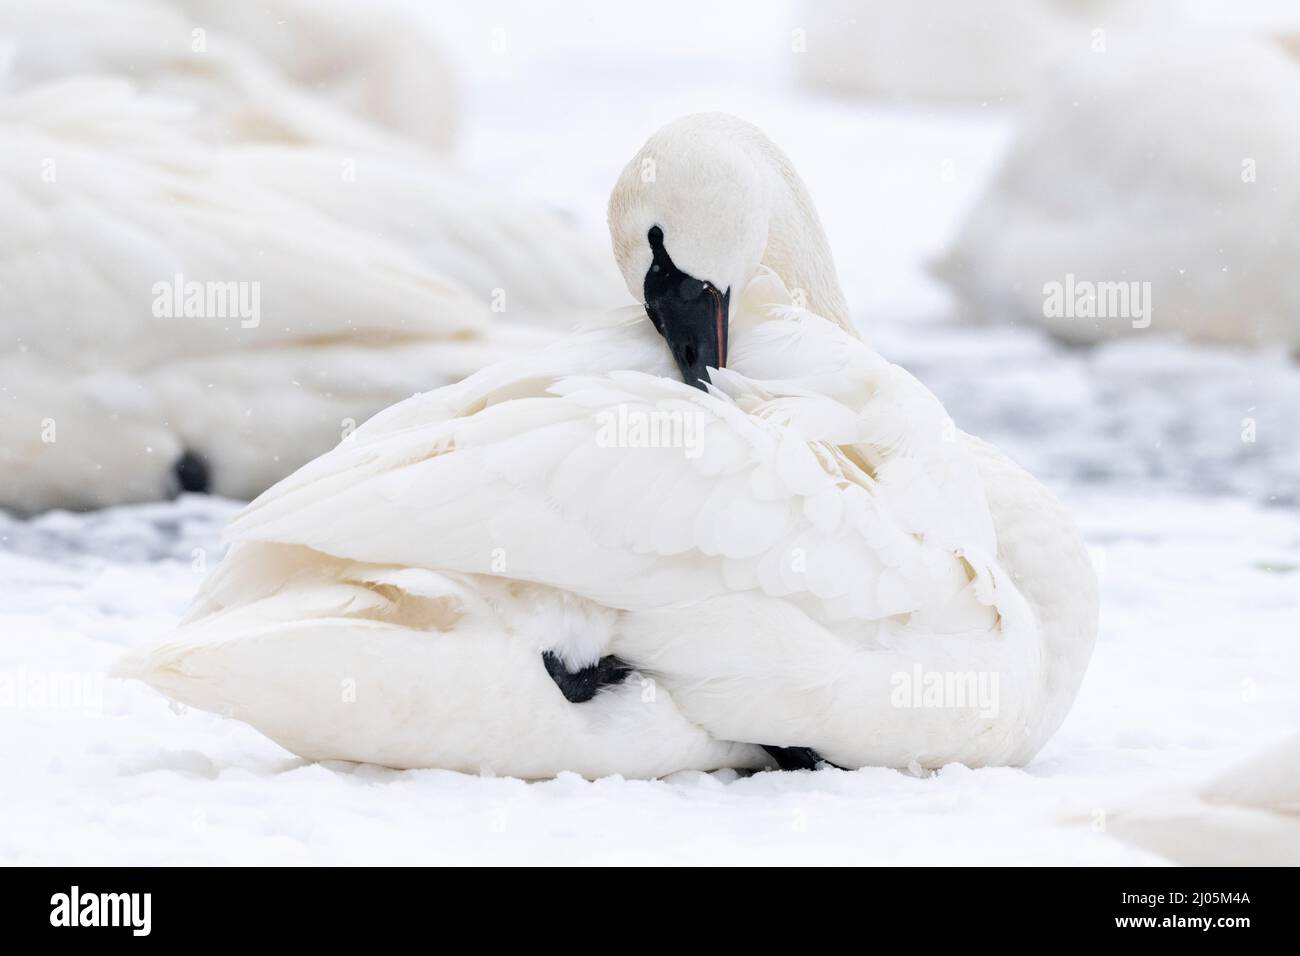 Trumpeter swan (Cygnus buccinator) preening and fixing feathers, St. Croix river, WI, USA, by Dominique Braud/Dembinsky Photo Assoc Stock Photo